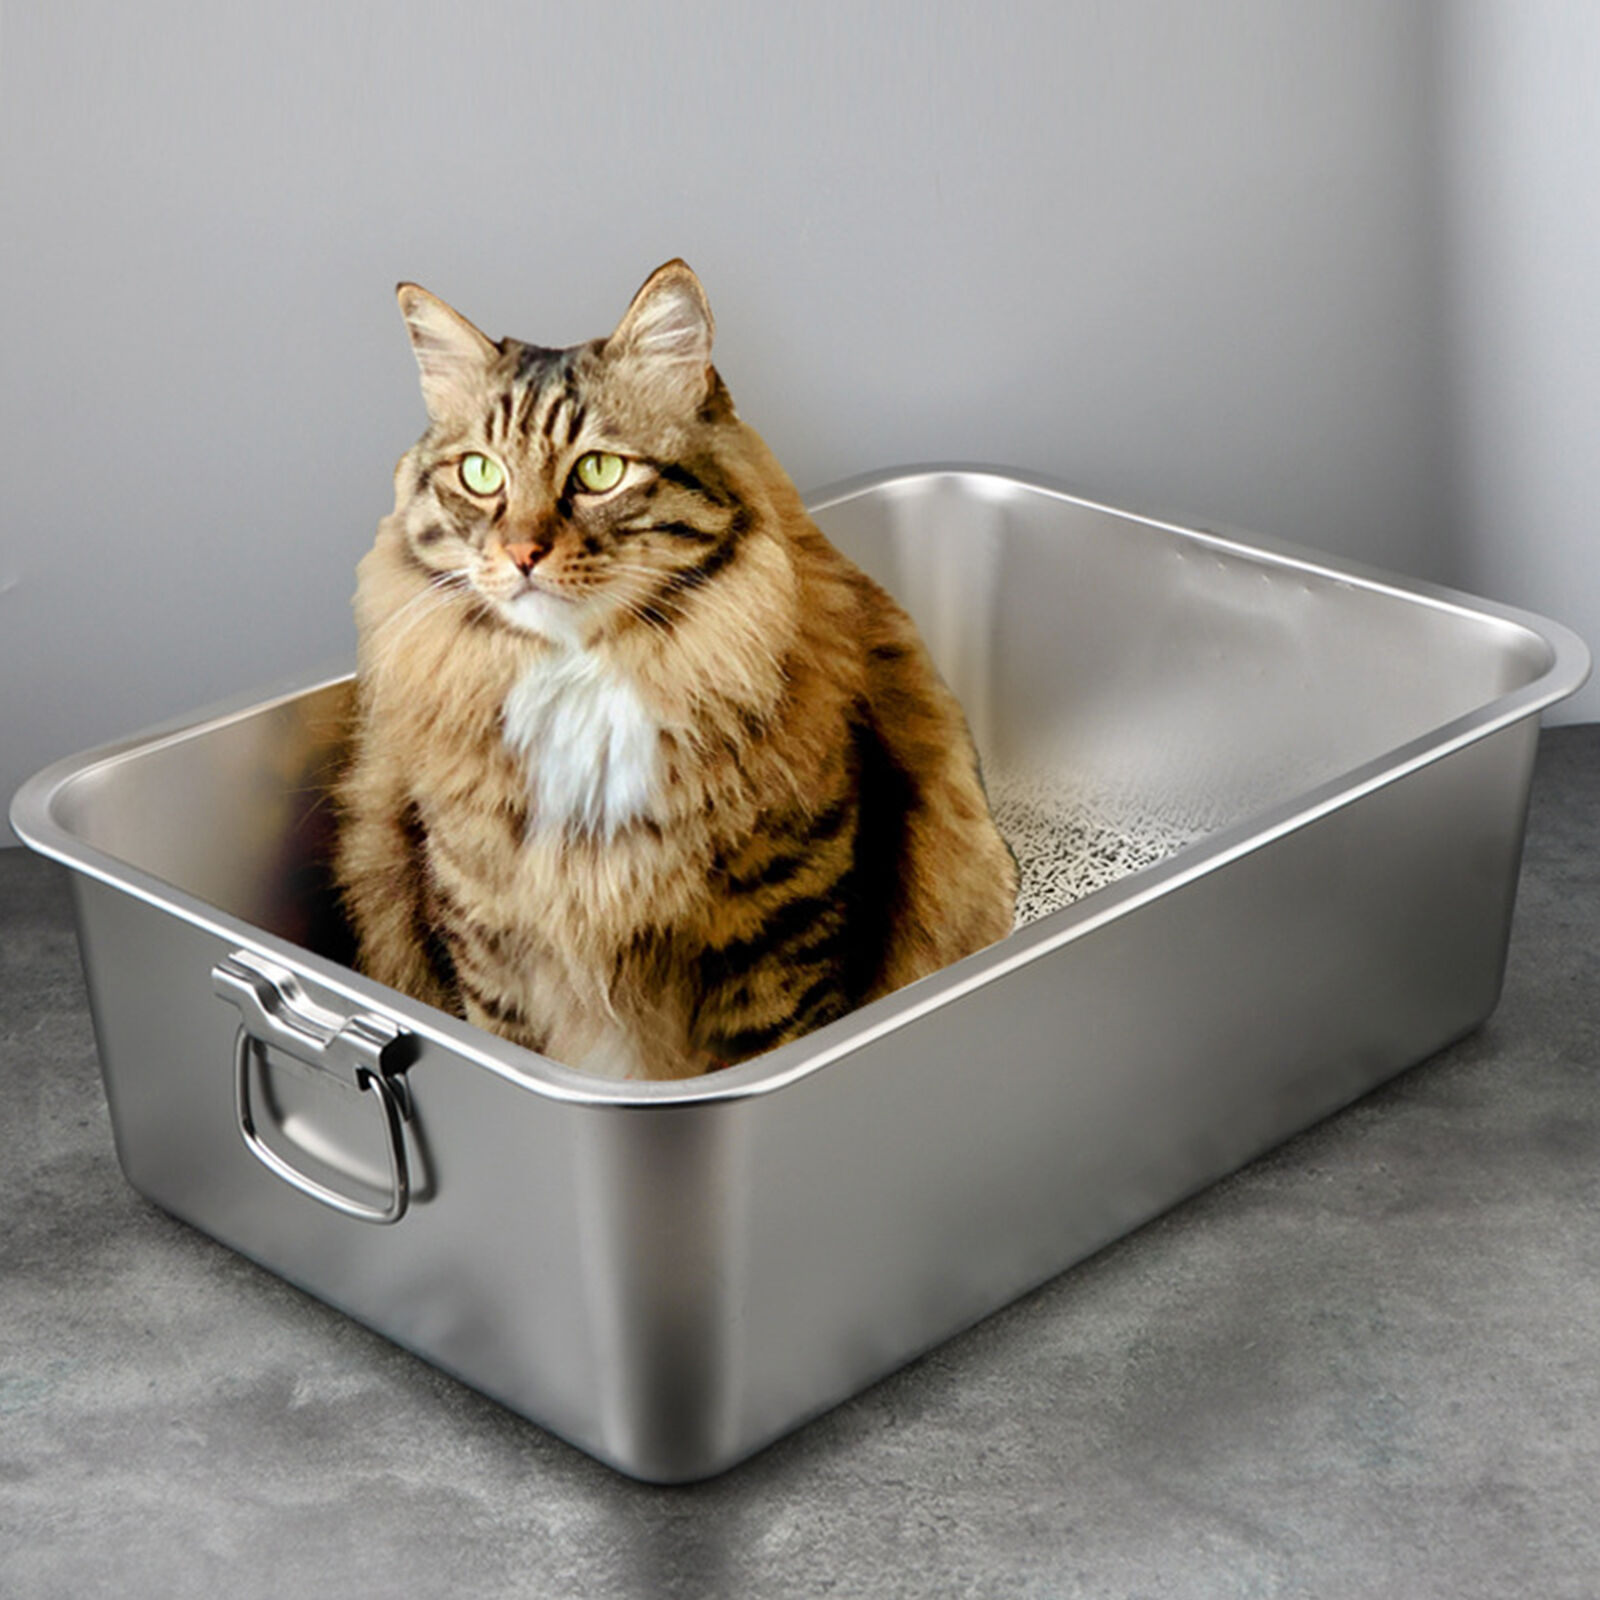 Low Entry Stainless Steel Litter Box Durable Cat with Design Spacious Unbranded